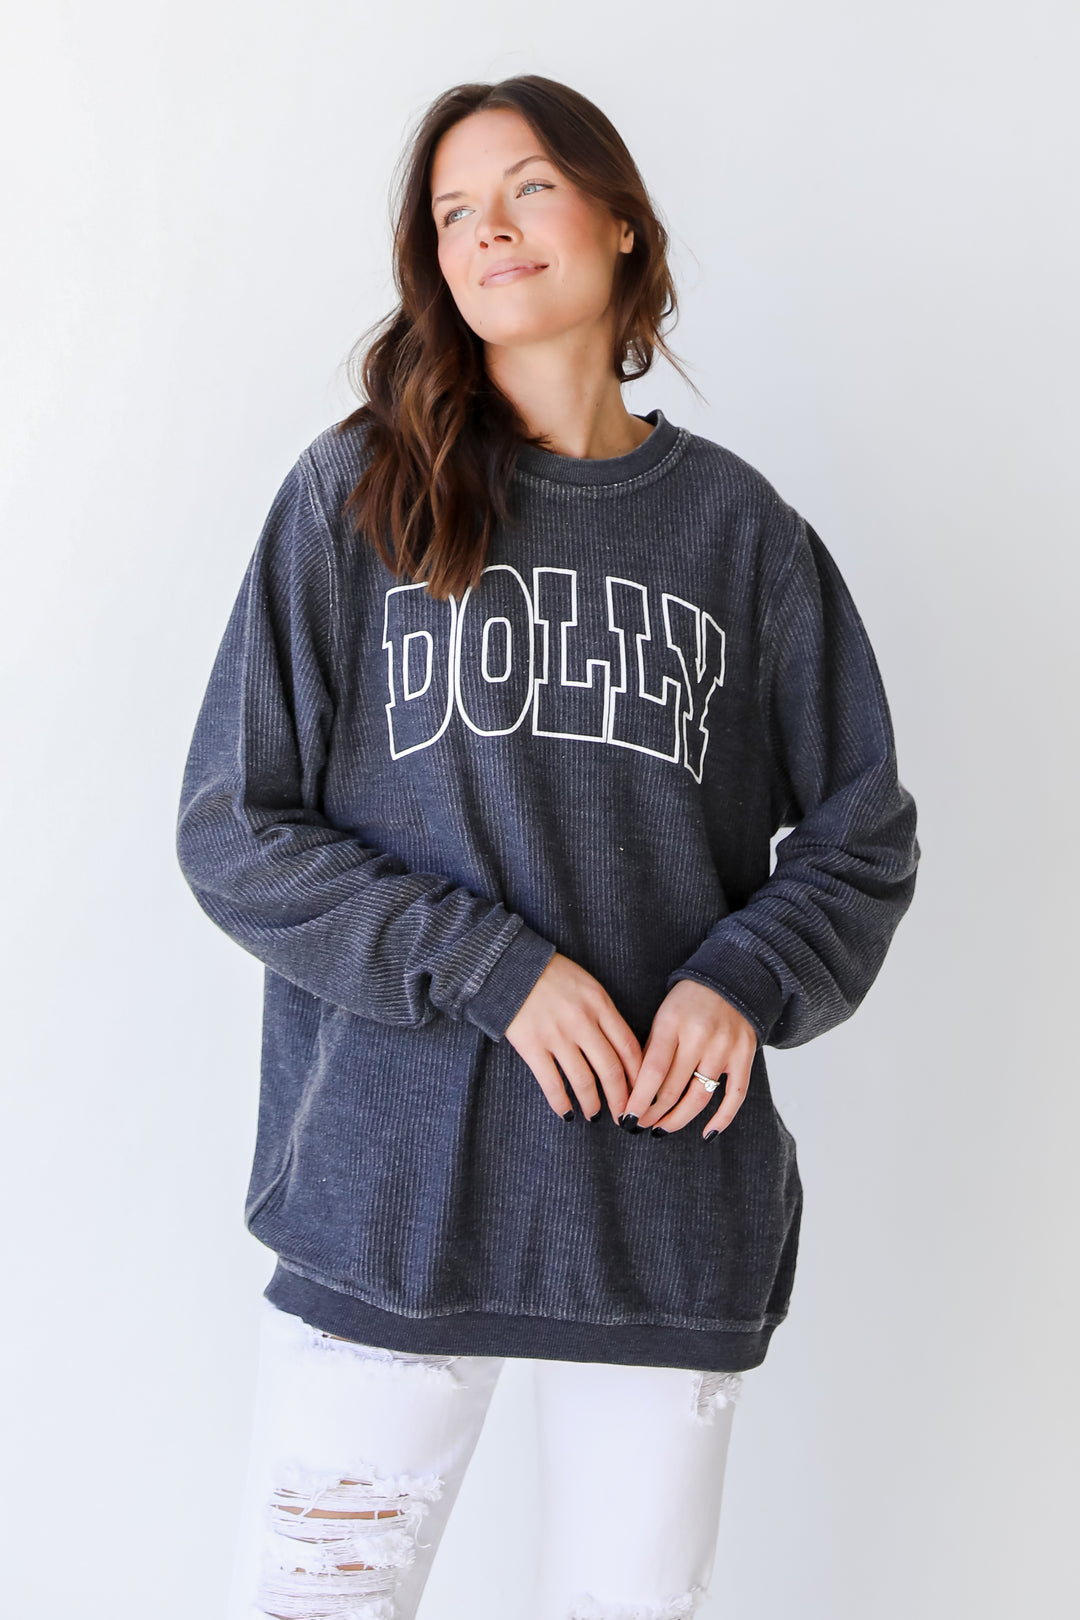 Dolly Corded Pullover. Dolly Sweatshirt, Graphic Sweatshirt, Oversized, Comfy